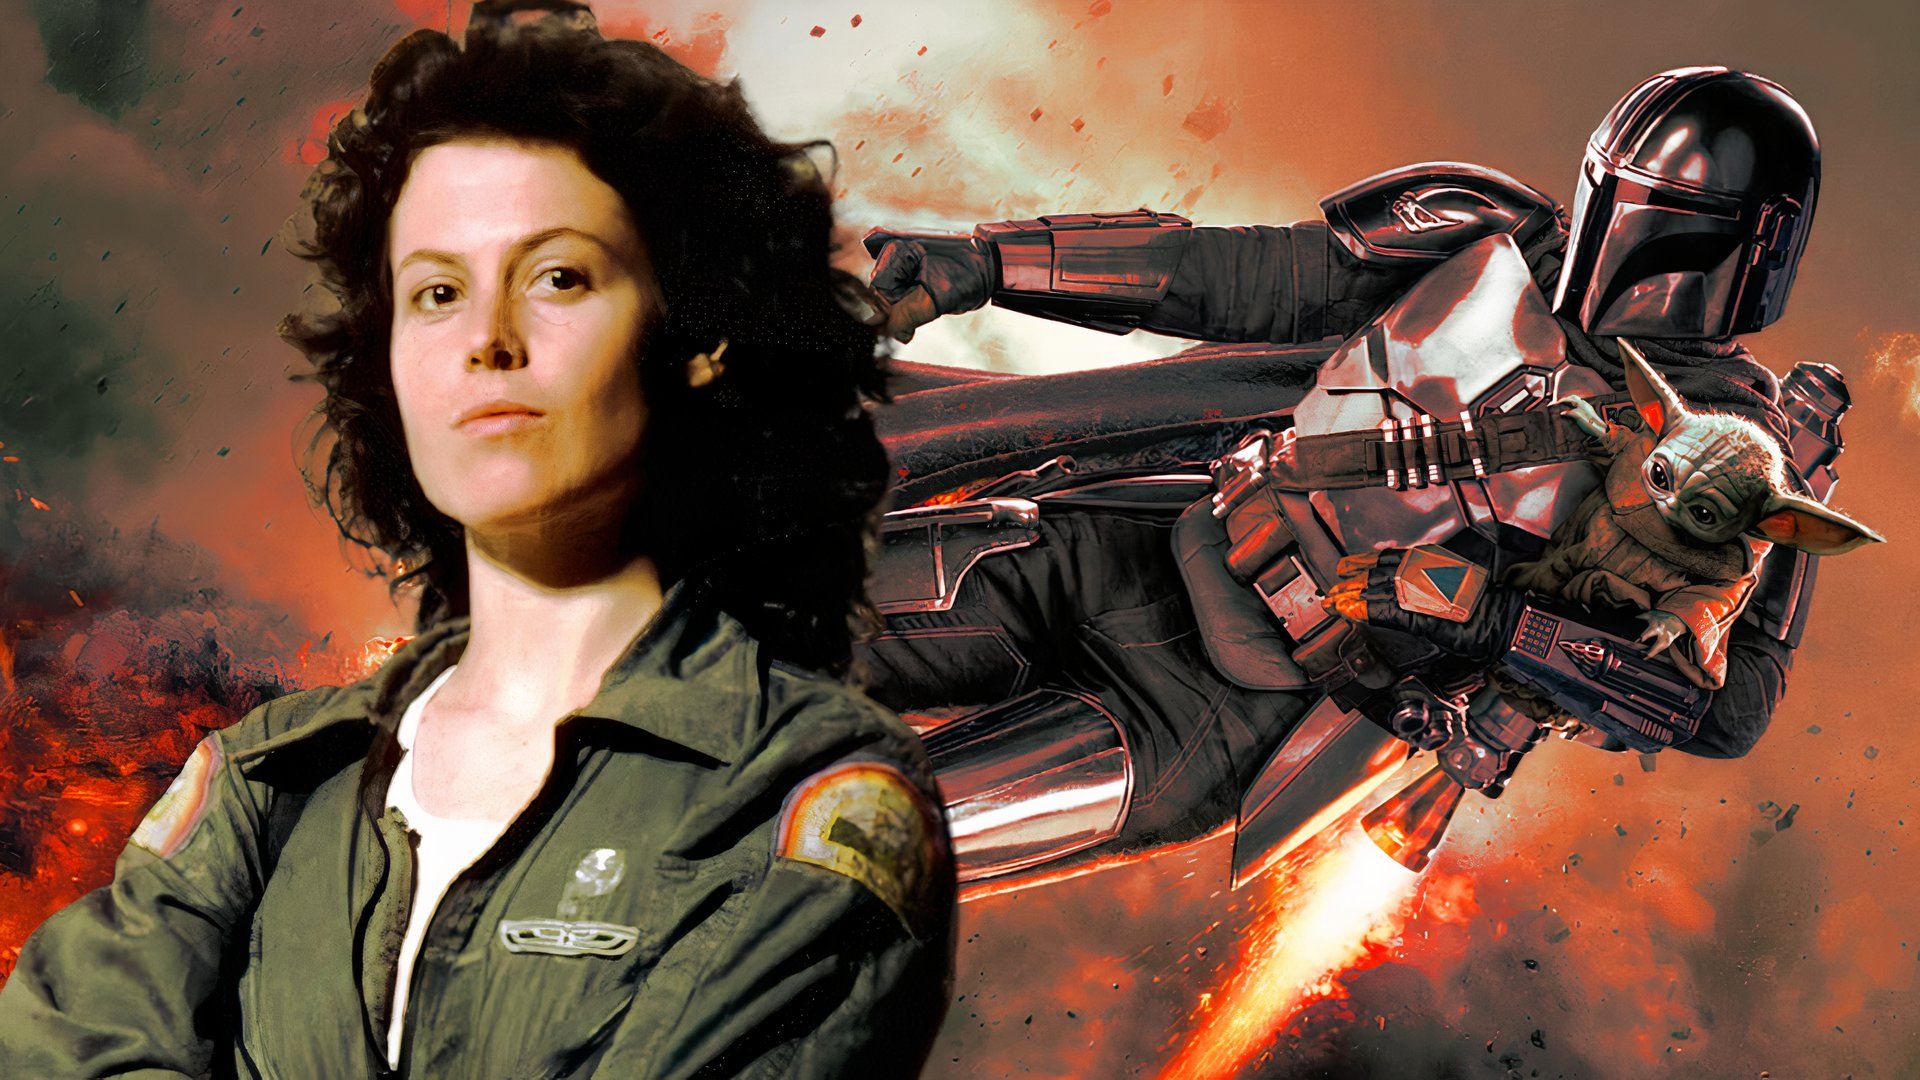 Sigourney Weaver in Aliens over and image of The Mandalorian and Grogu